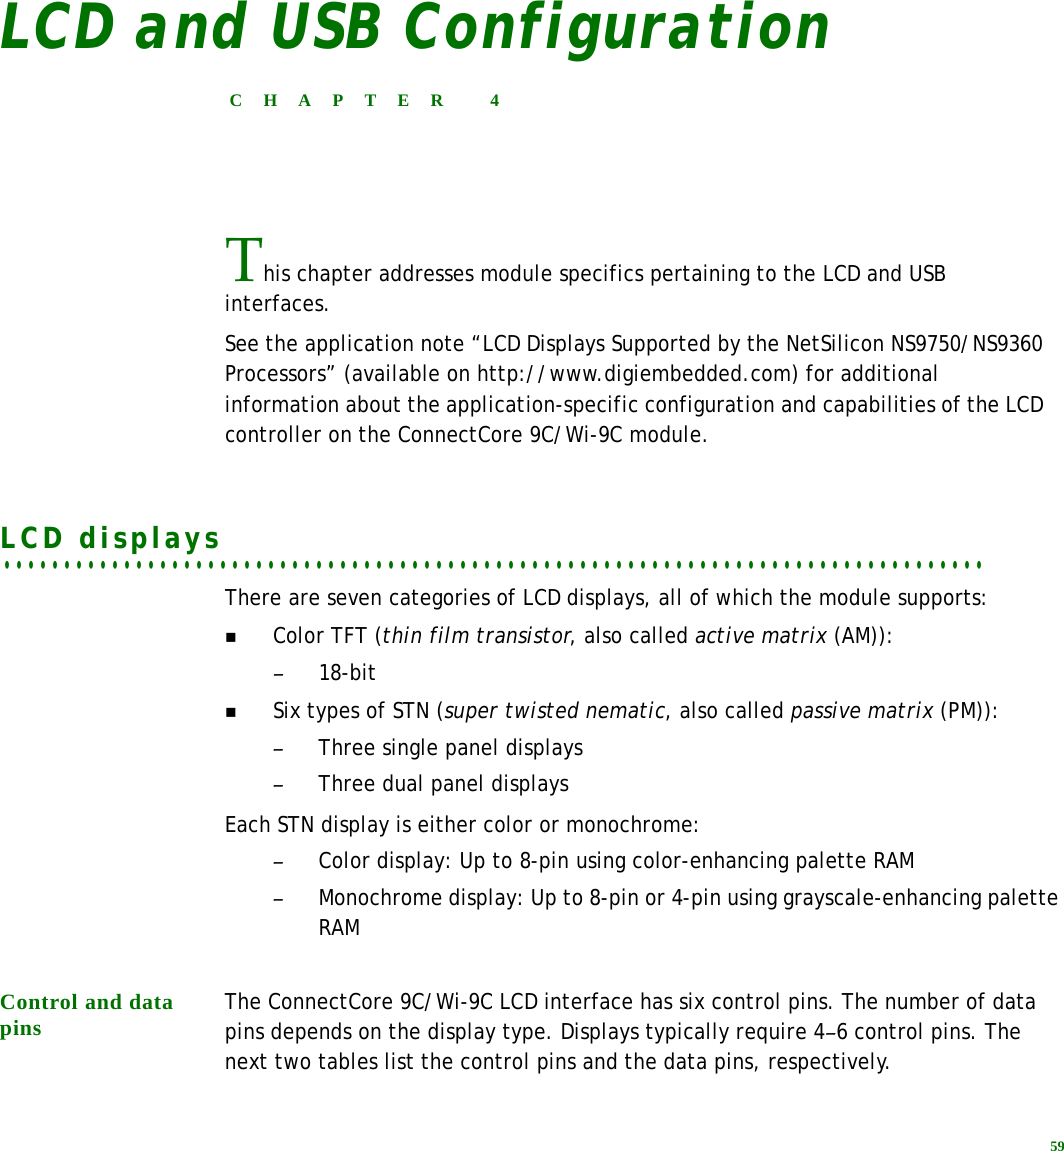 59LCD and USB ConfigurationCHAPTER 4This chapter addresses module specifics pertaining to the LCD and USB interfaces.See the application note “LCD Displays Supported by the NetSilicon NS9750/NS9360 Processors” (available on http://www.digiembedded.com) for additional information about the application-specific configuration and capabilities of the LCD controller on the ConnectCore 9C/Wi-9C module.. . . . . . . . . . . . . . . . . . . . . . . . . . . . . . . . . . . . . . . . . . . . . . . . . . . . . . . . . . . . . . . . . . . . . . . . . . . . . . . . . .LCD displays There are seven categories of LCD displays, all of which the module supports:Color TFT (thin film transistor, also called active matrix (AM)):–18-bitSix types of STN (super twisted nematic, also called passive matrix (PM)): –Three single panel displays–Three dual panel displaysEach STN display is either color or monochrome:–Color display: Up to 8-pin using color-enhancing palette RAM–Monochrome display: Up to 8-pin or 4-pin using grayscale-enhancing palette RAMControl and data pins The ConnectCore 9C/Wi-9C LCD interface has six control pins. The number of data pins depends on the display type. Displays typically require 4–6 control pins. The next two tables list the control pins and the data pins, respectively.